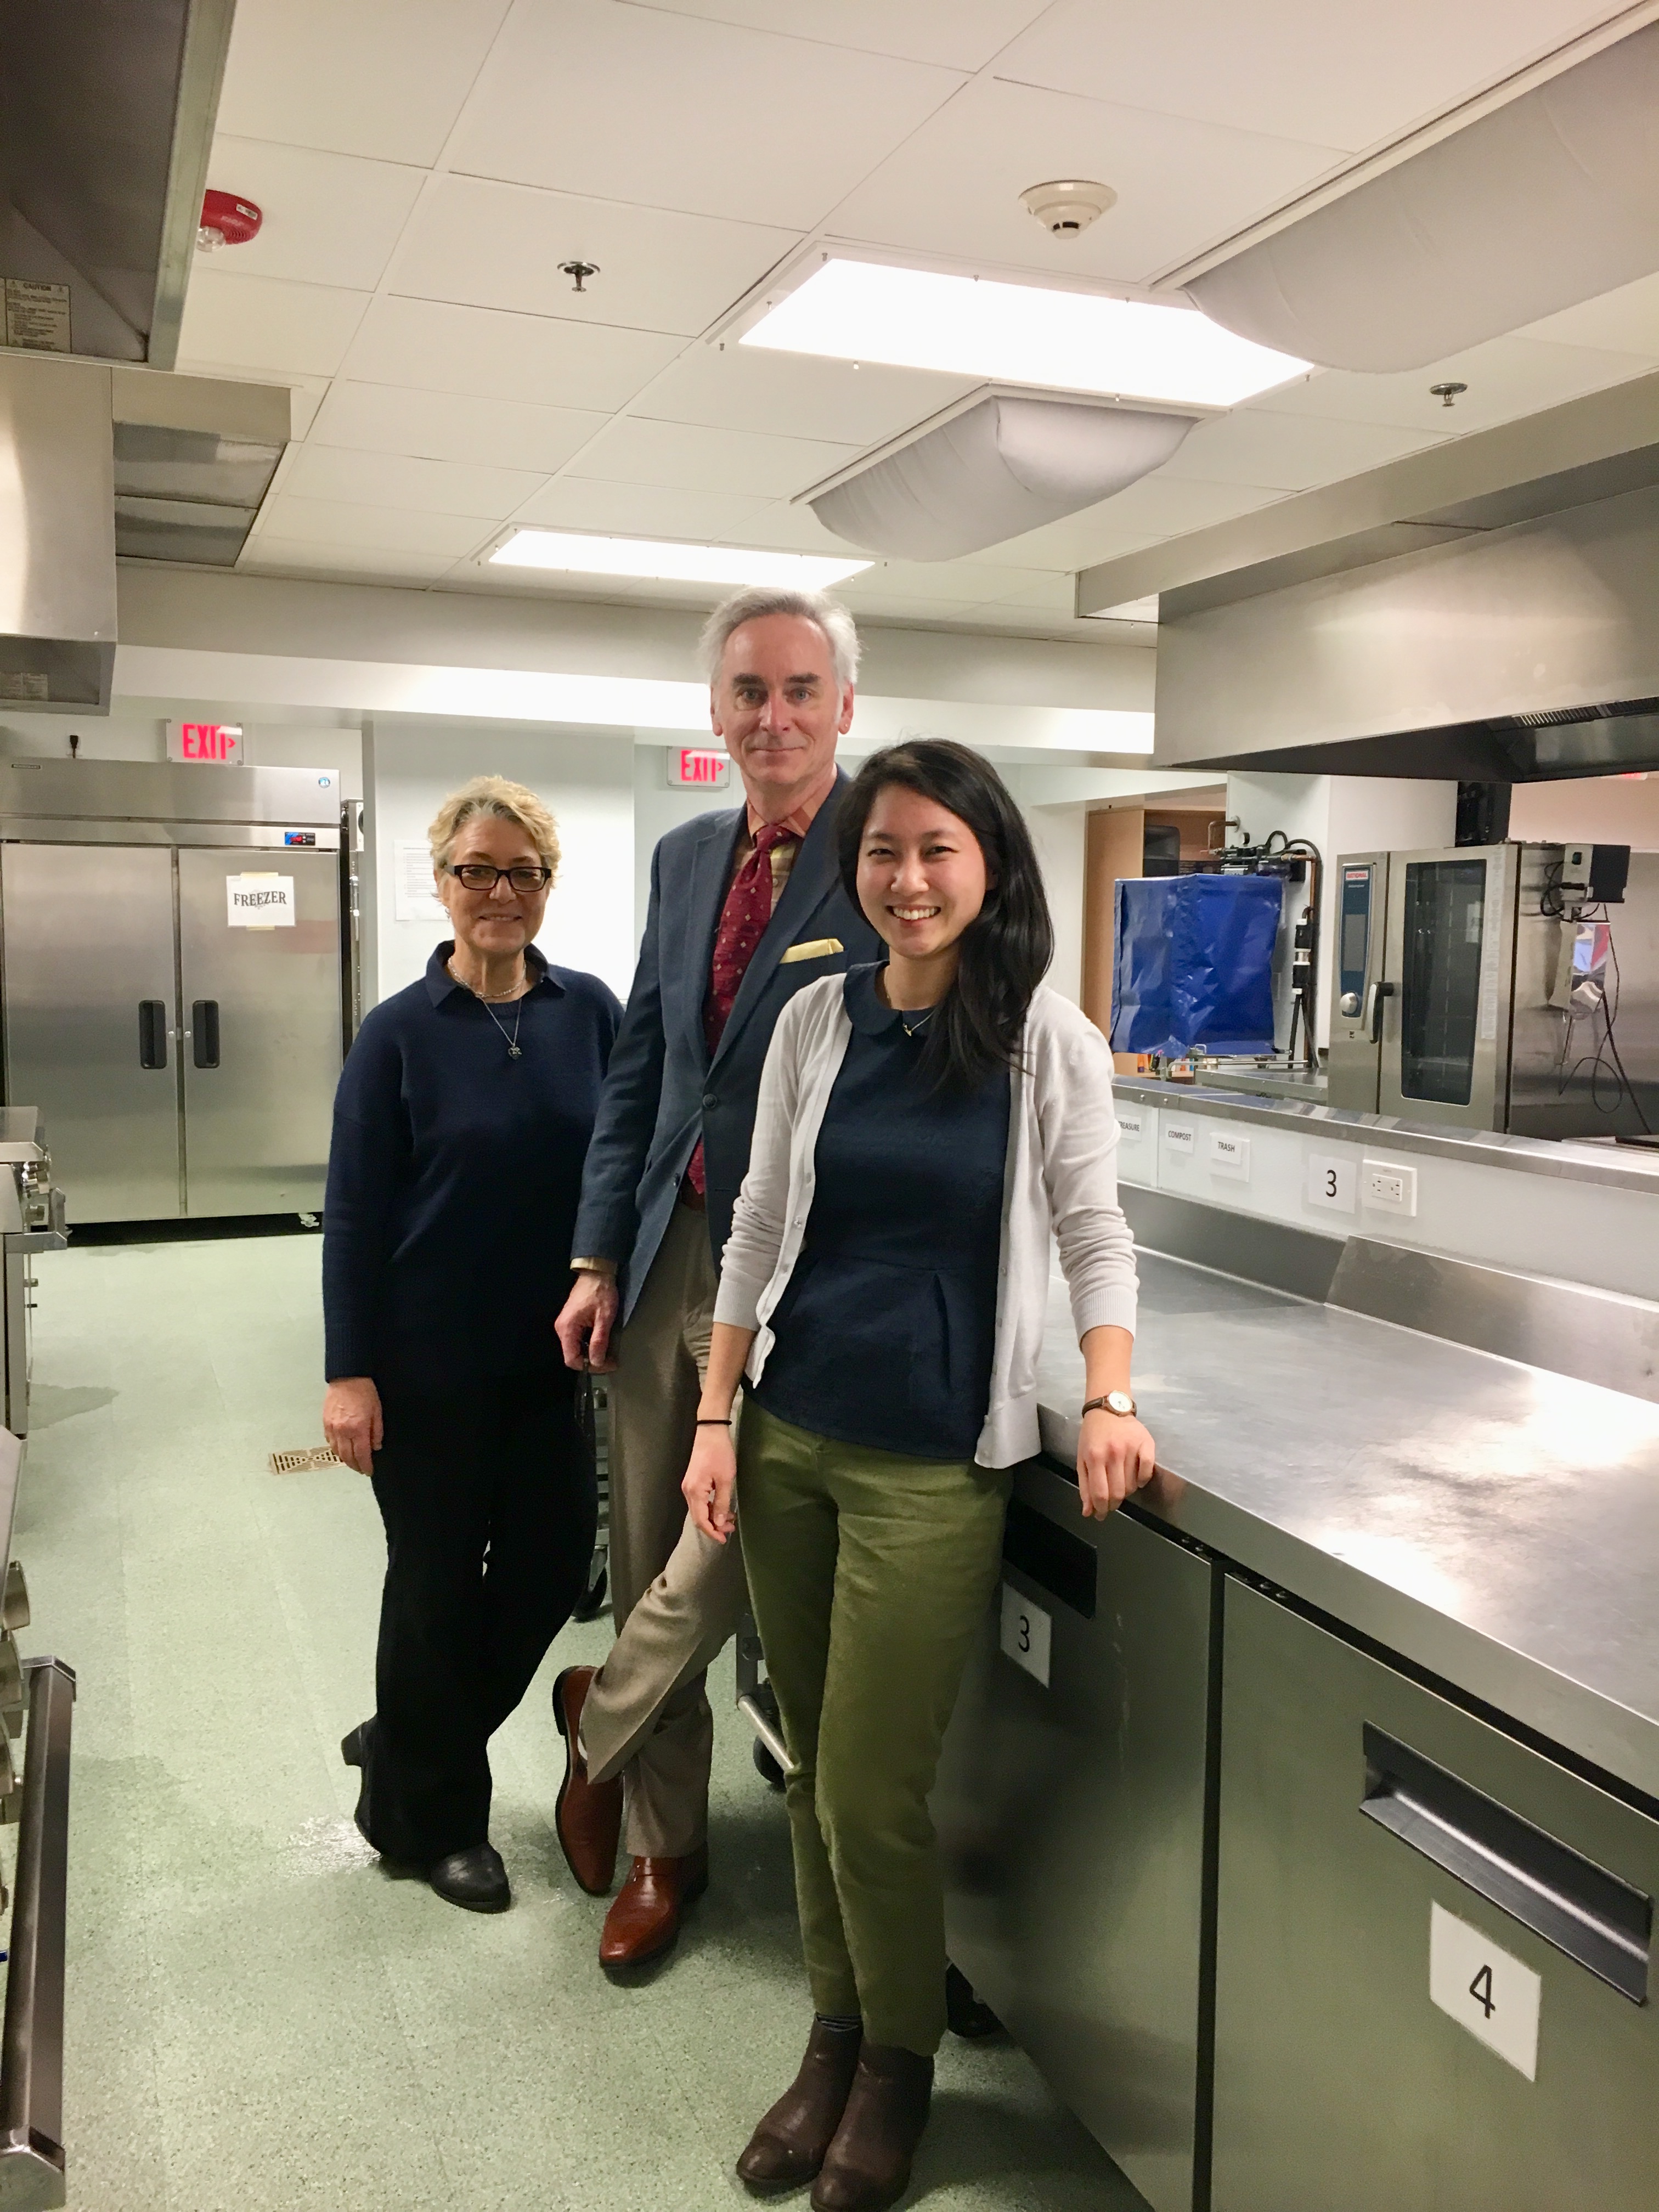 Karen Karp, President of KK&P, Executive Director and the Associate Dean for Clinical Services, Dr. Timothy Harlan, and consultant intern Amy Gu, a current MBA student at New York University’s Stern School of Business, the Goldring Center 